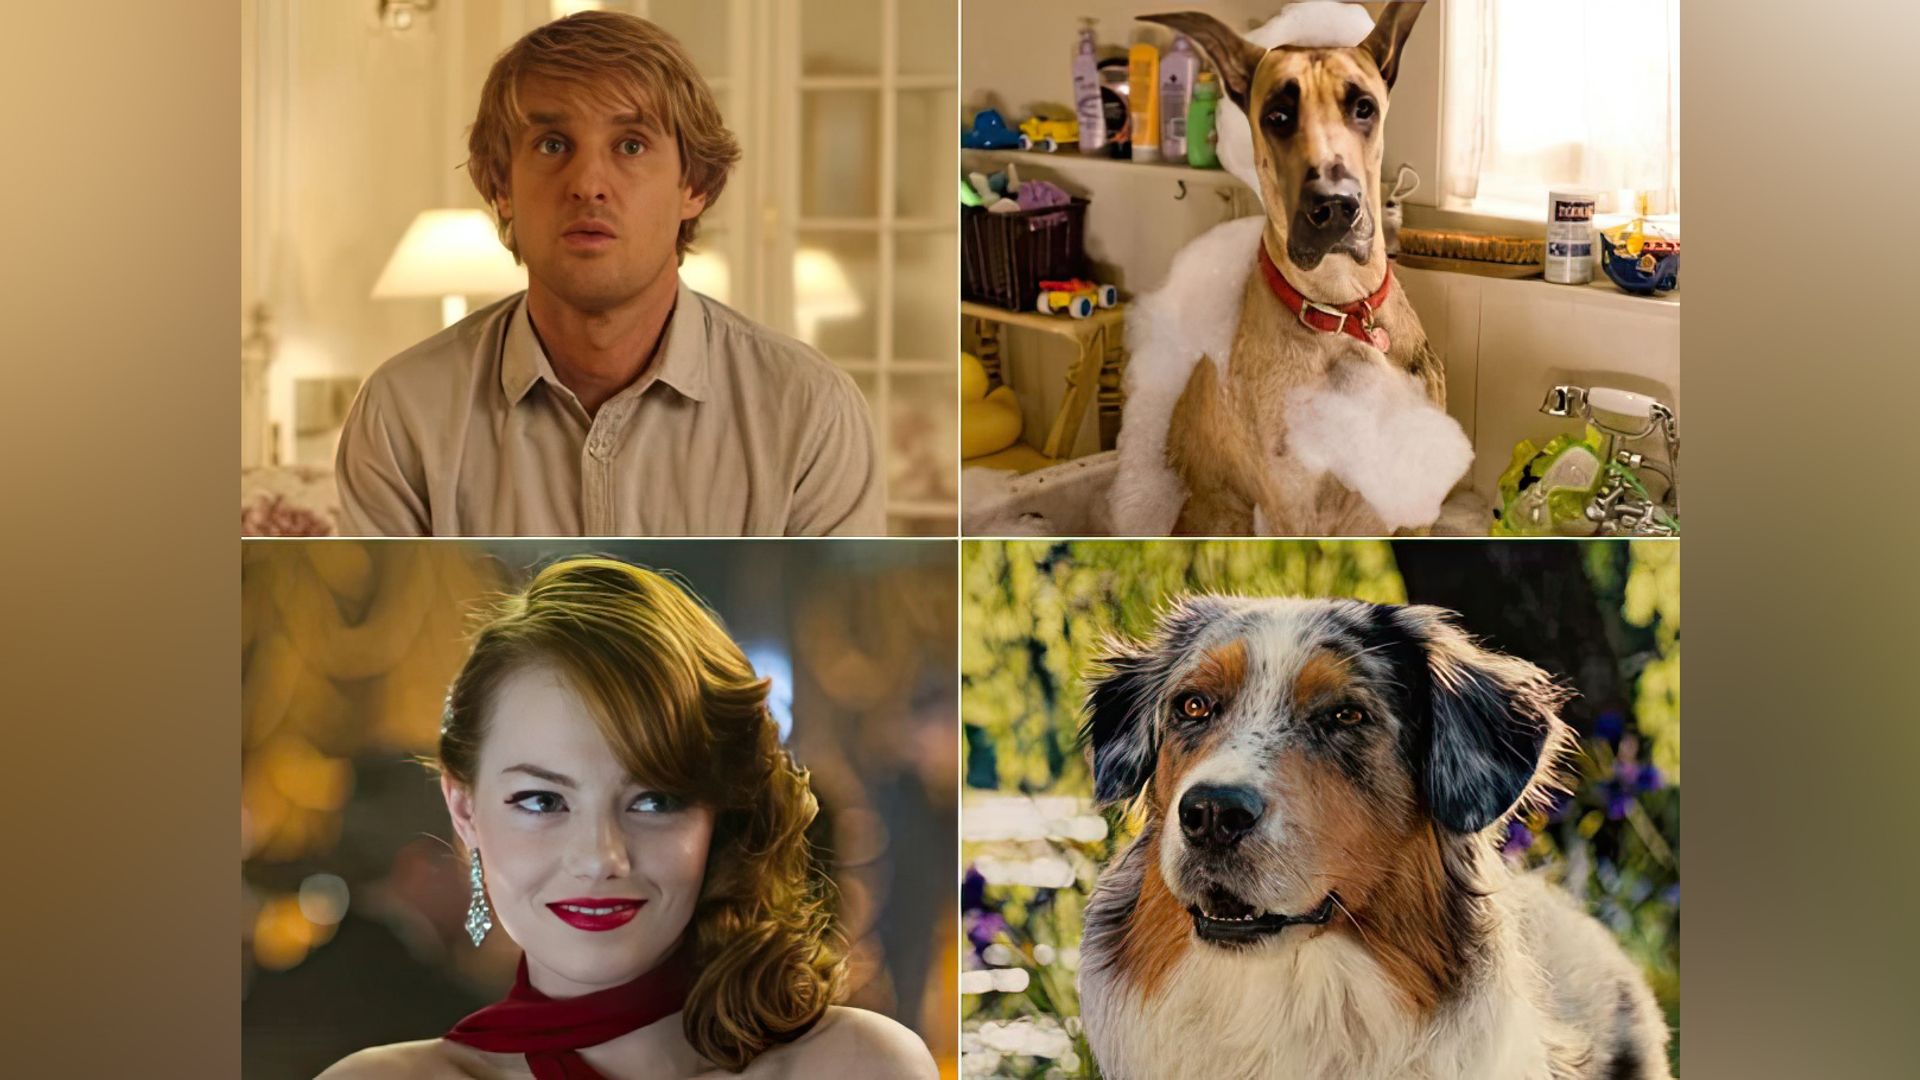 Emma Stone and Owen Wilson voicing the main characters of “Marmaduke”